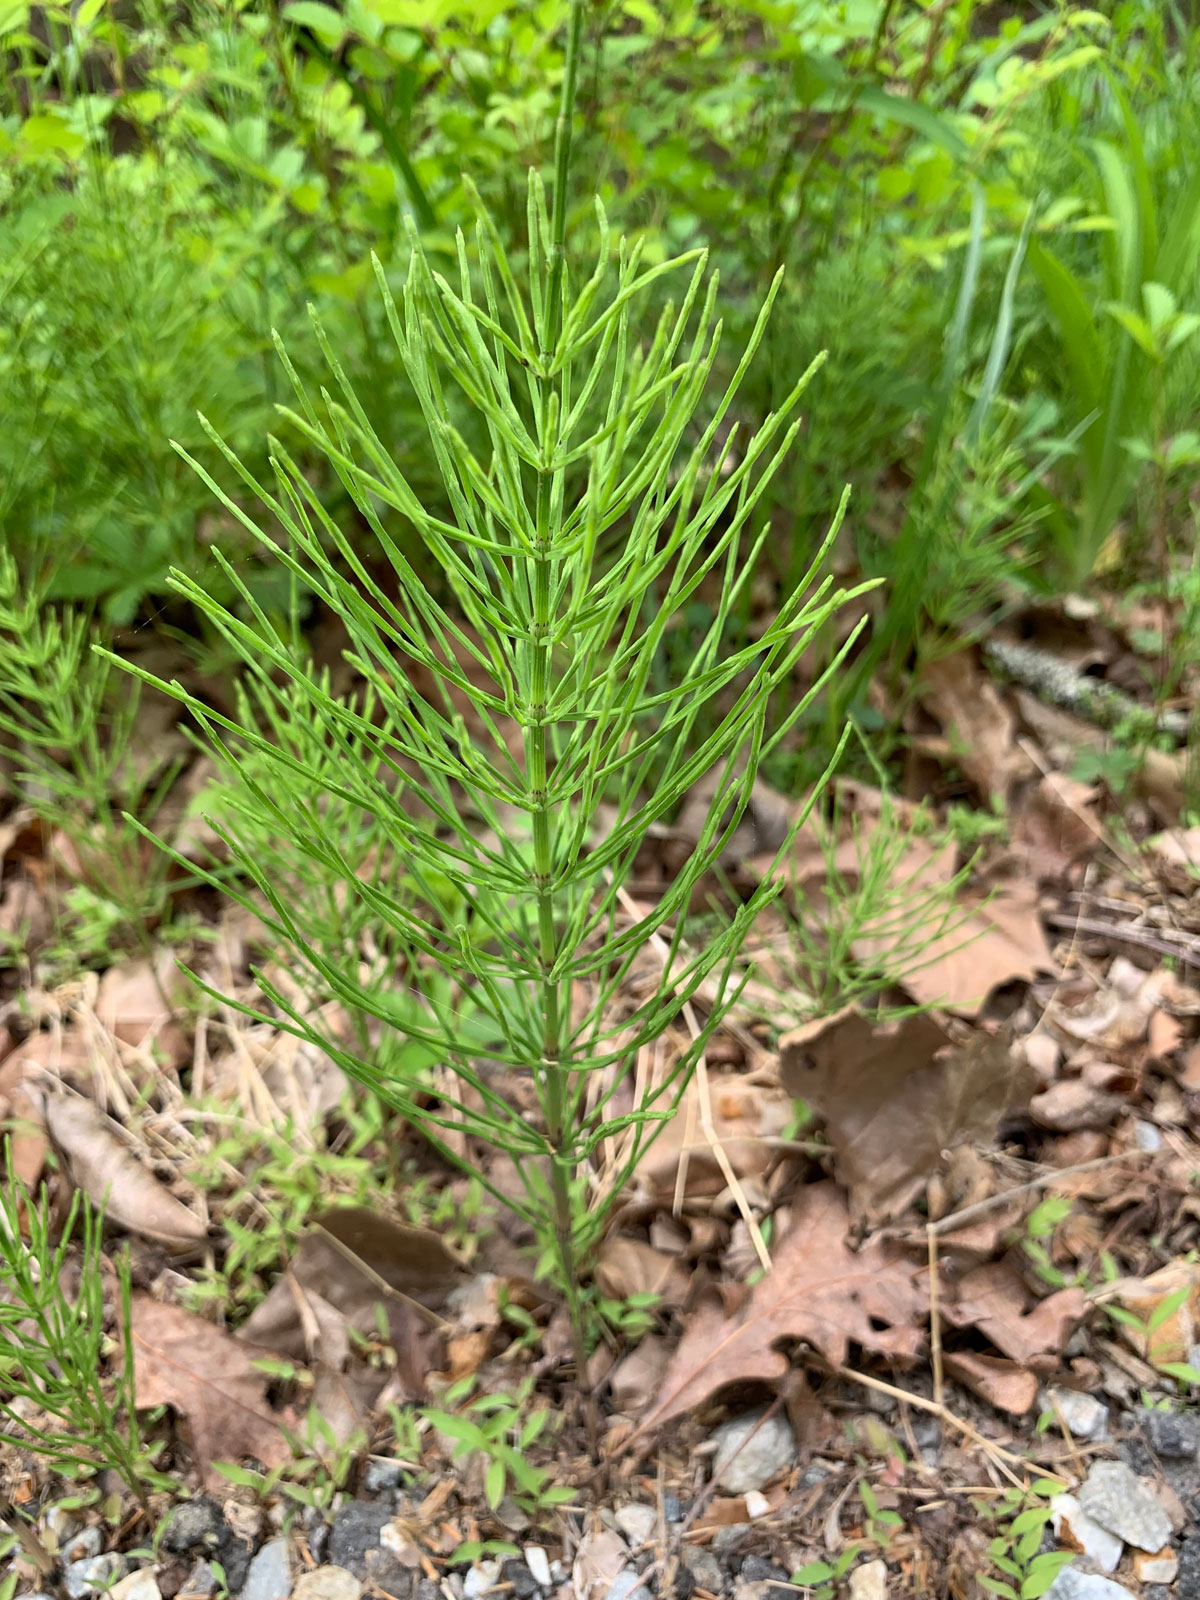 Green upright plant with feathery foliage